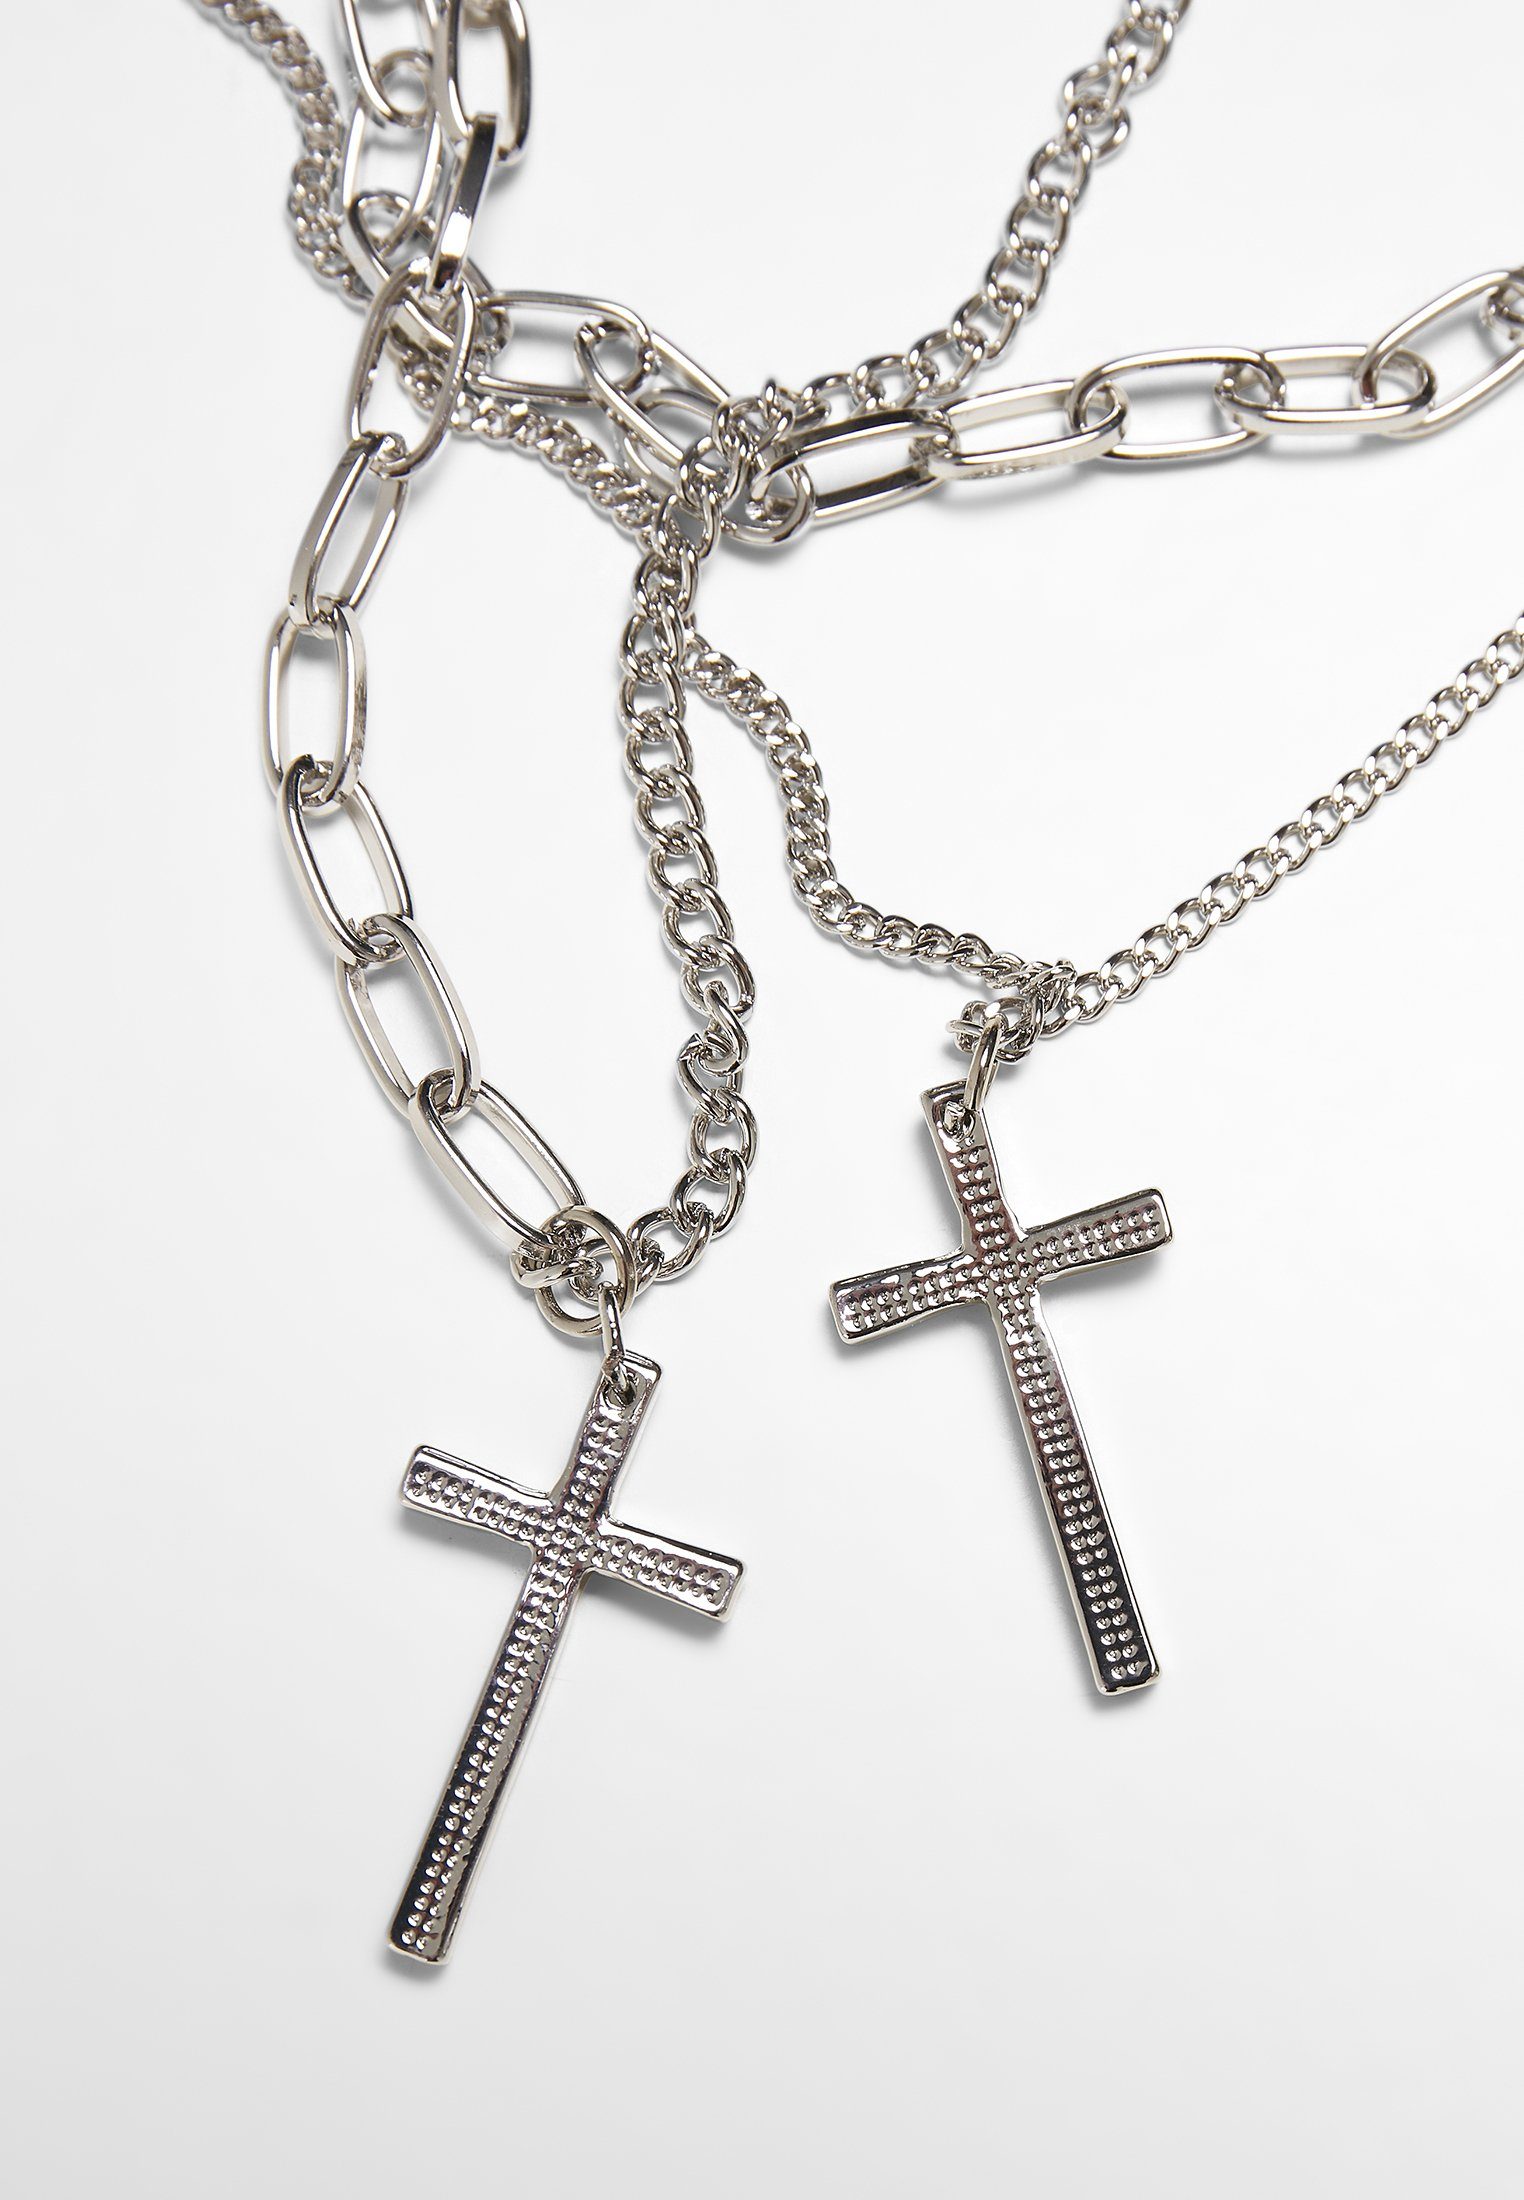 URBAN Edelstahlkette Necklace Accessoires CLASSICS Cross Layering silver